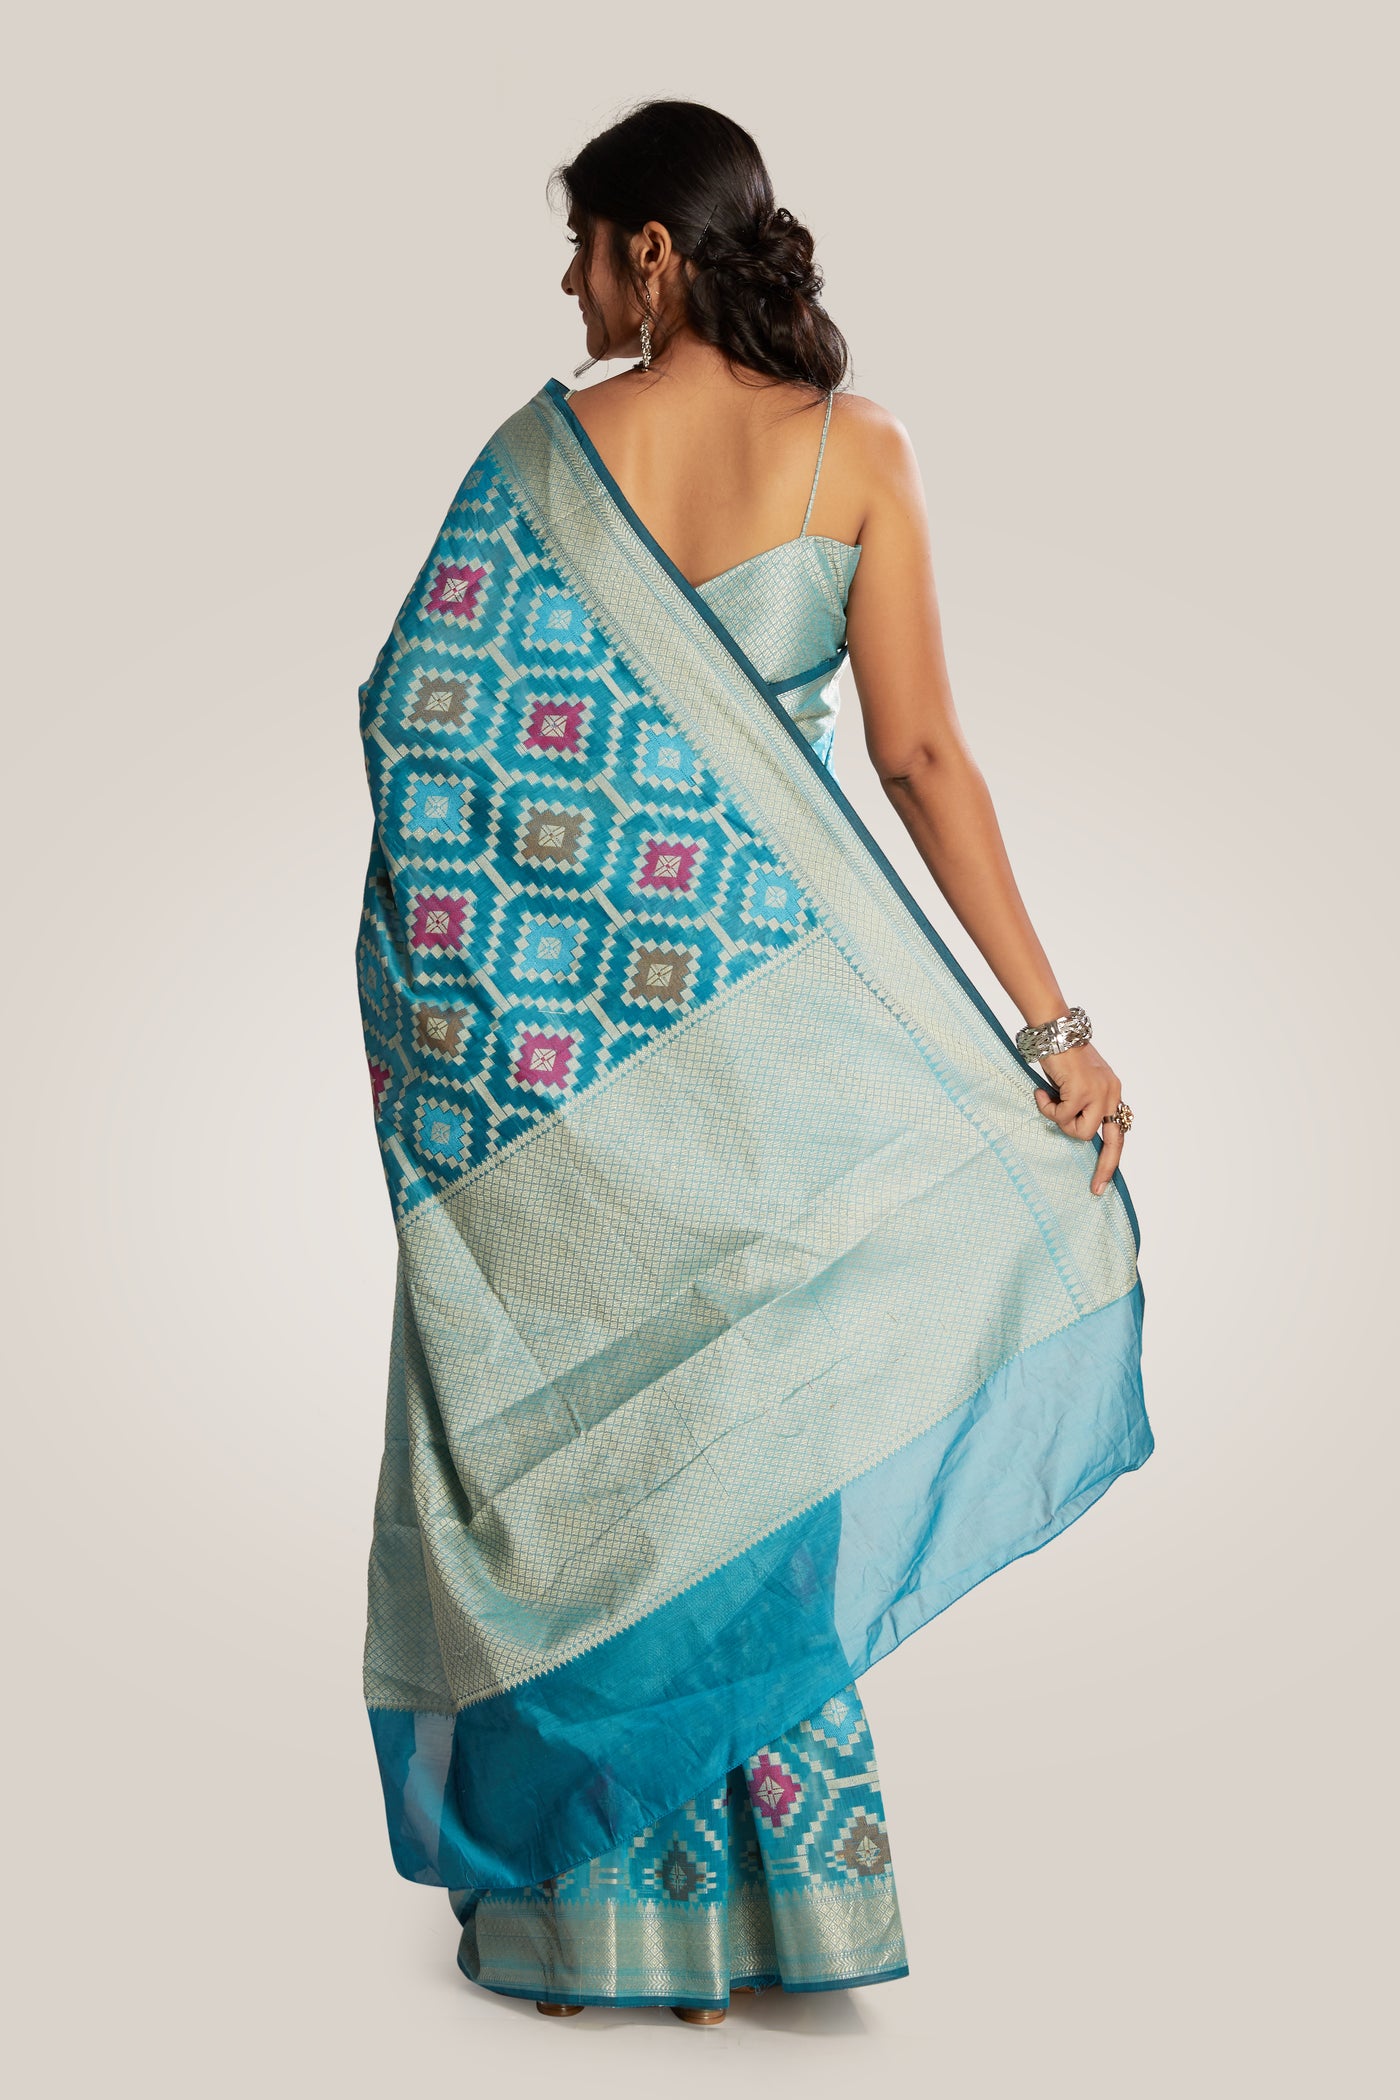 Ethnic Motif Silk Saree - Indian Clothing in Denver, CO, Aurora, CO, Boulder, CO, Fort Collins, CO, Colorado Springs, CO, Parker, CO, Highlands Ranch, CO, Cherry Creek, CO, Centennial, CO, and Longmont, CO. Nationwide shipping USA - India Fashion X